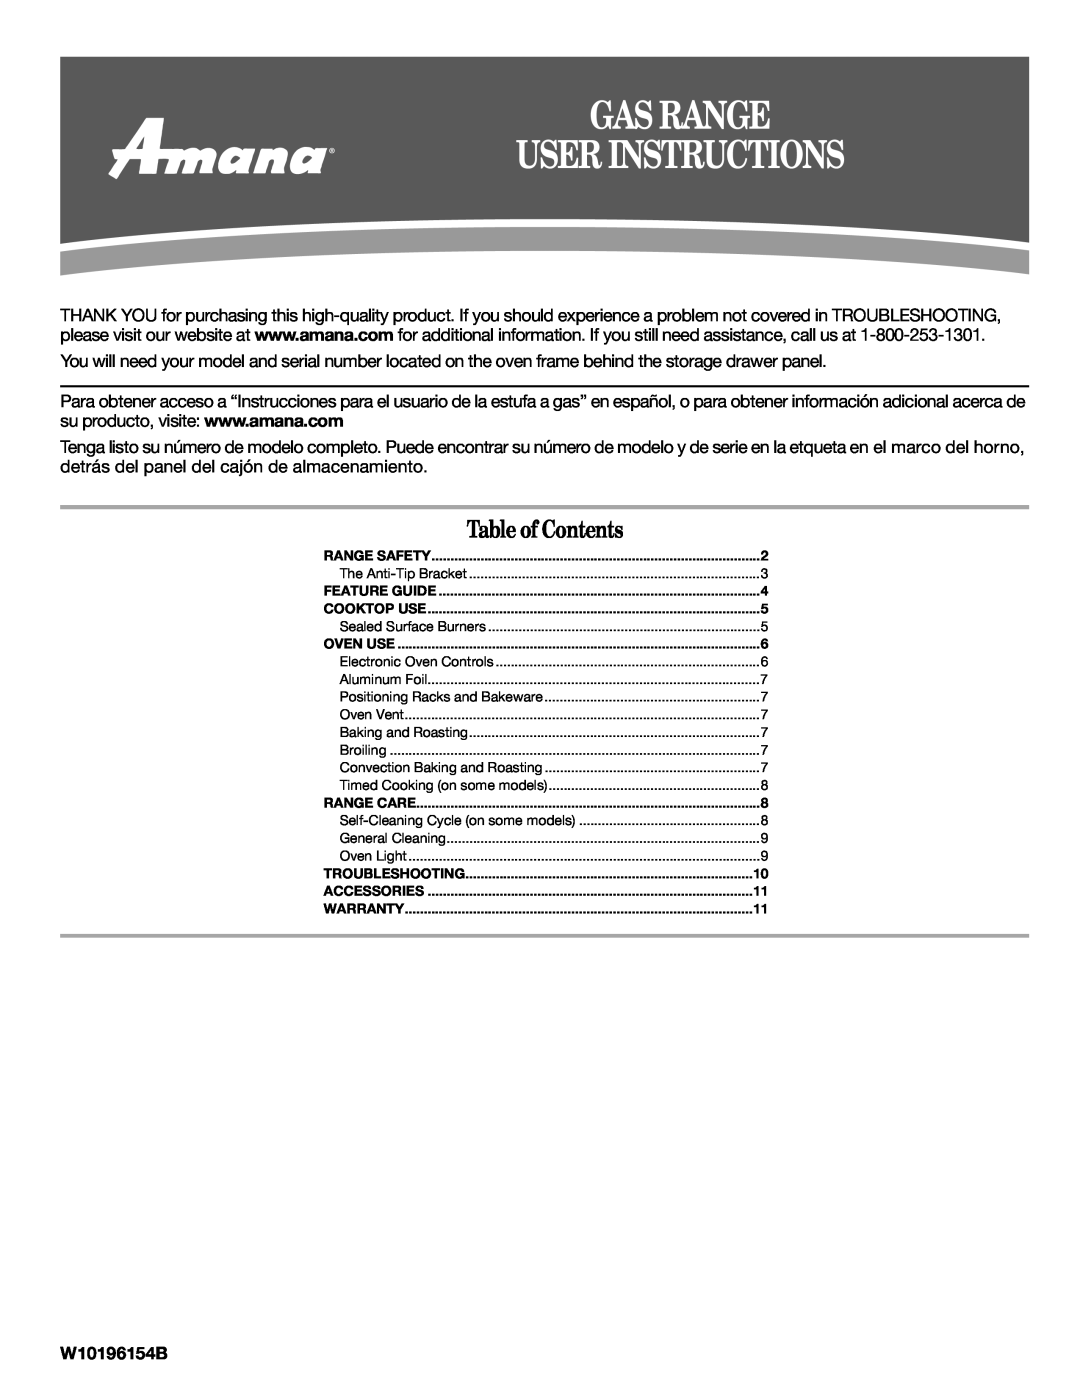 Amana AGR5844VDW warranty Gas Range User Instructions, Table of Contents, W10196154B 